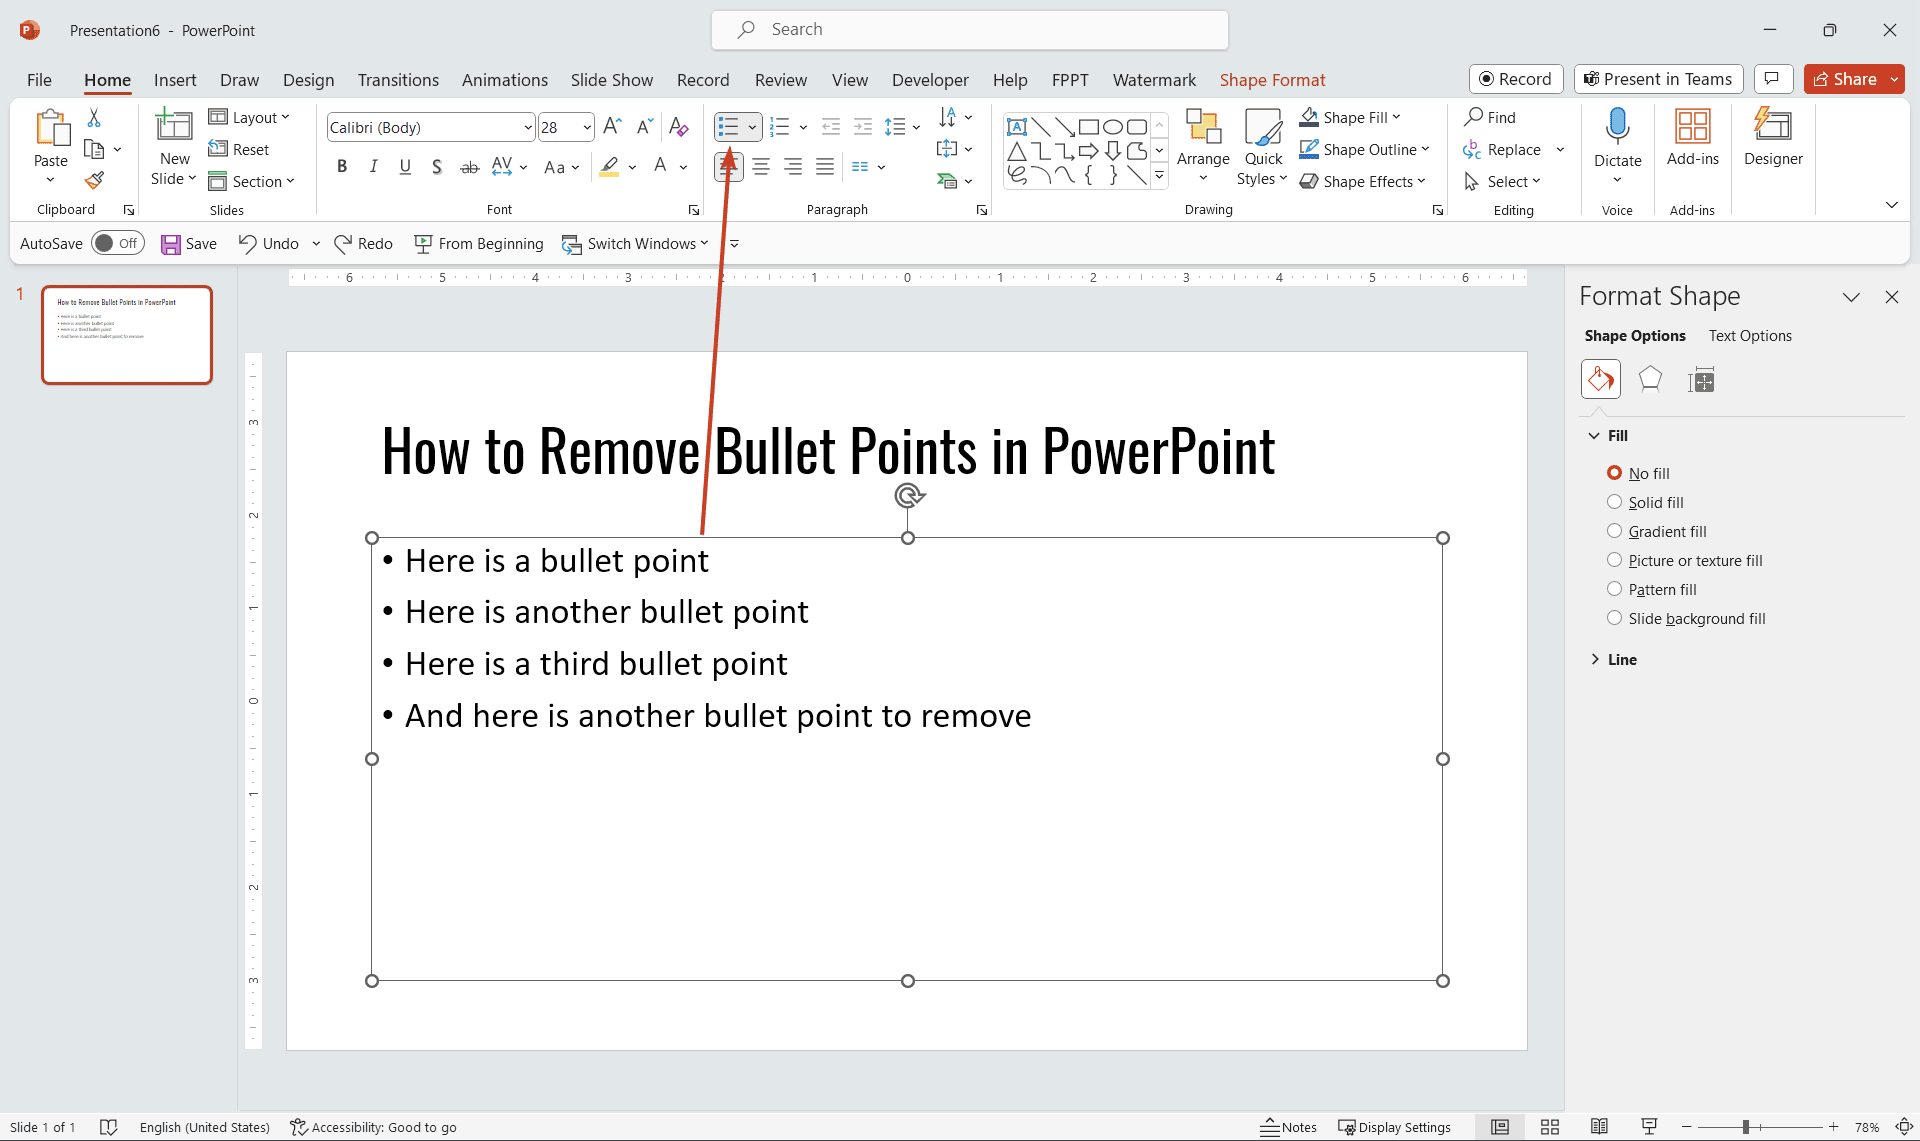 How to Remove Bullet Points in PowerPoint